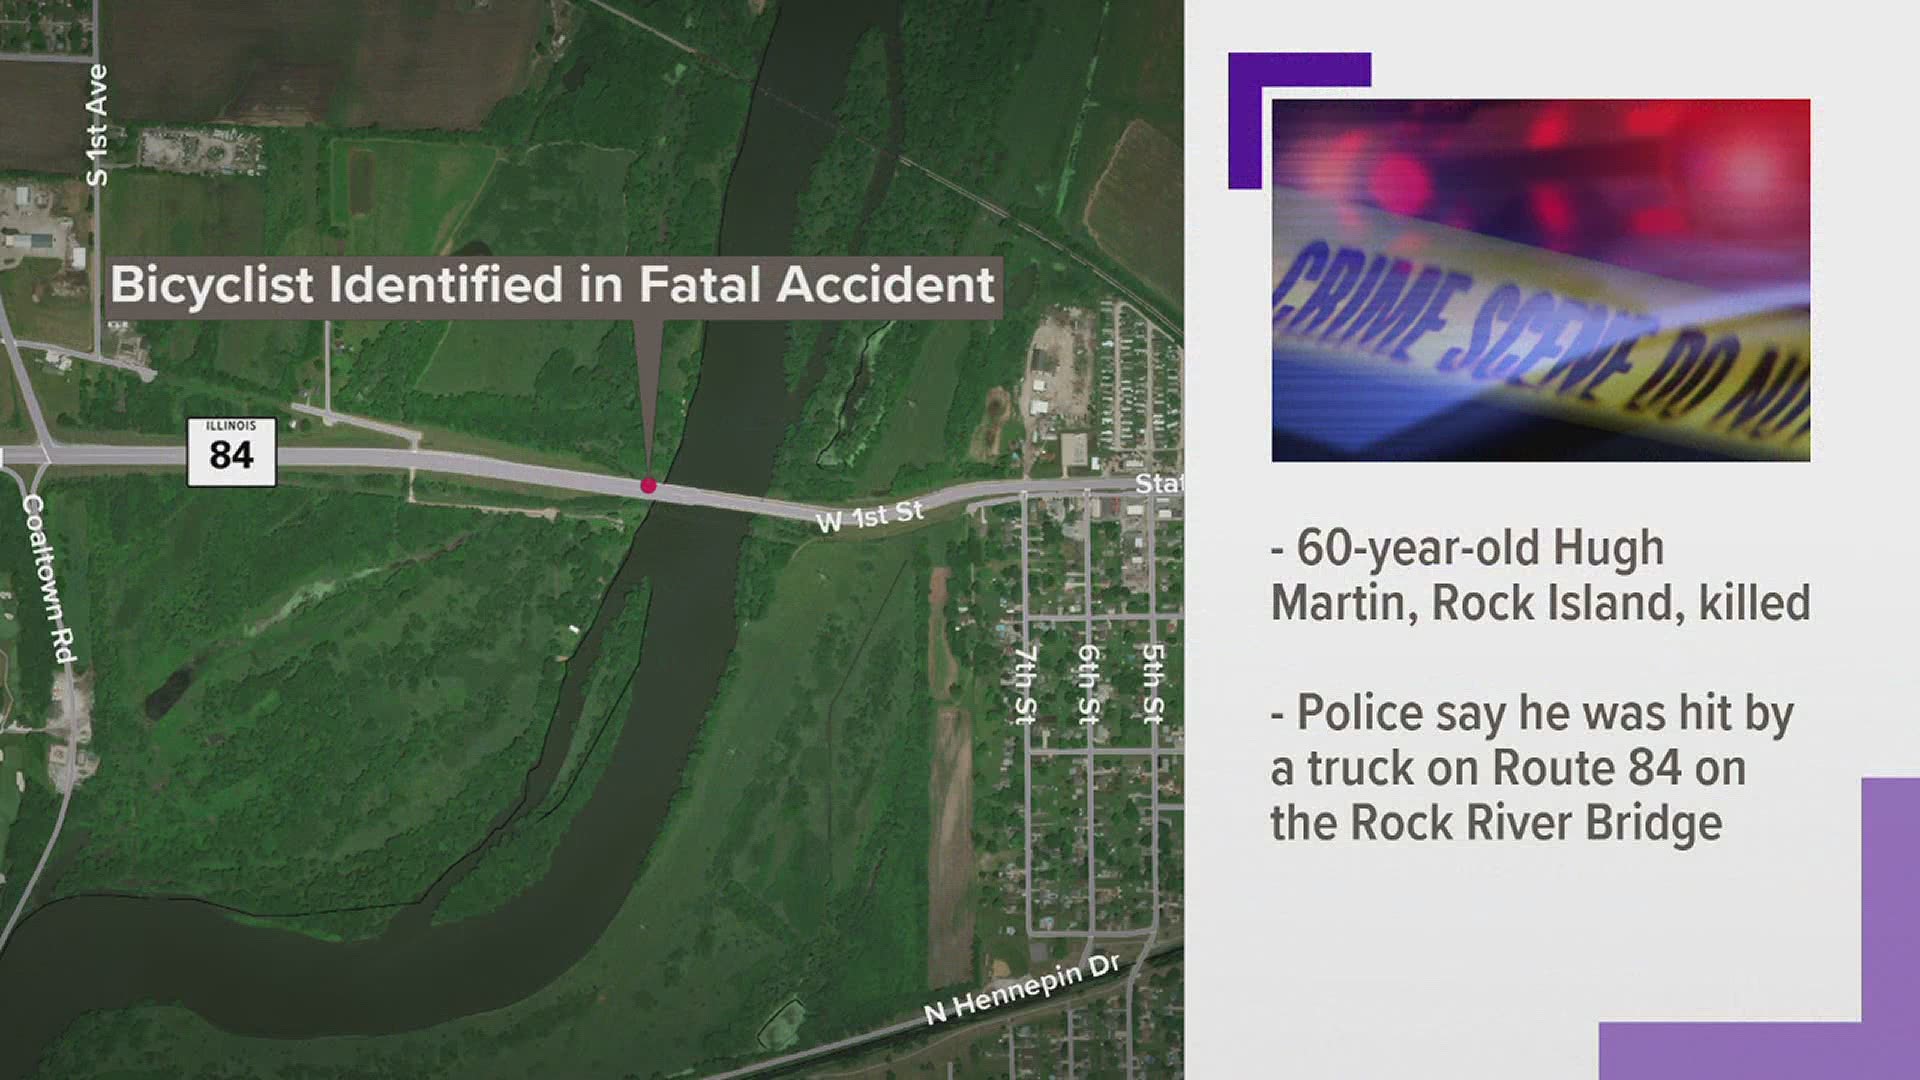 A 60-year-old man riding a bike was hit and killed by a driver on the Rock River Bridge along Illinois Route 84.